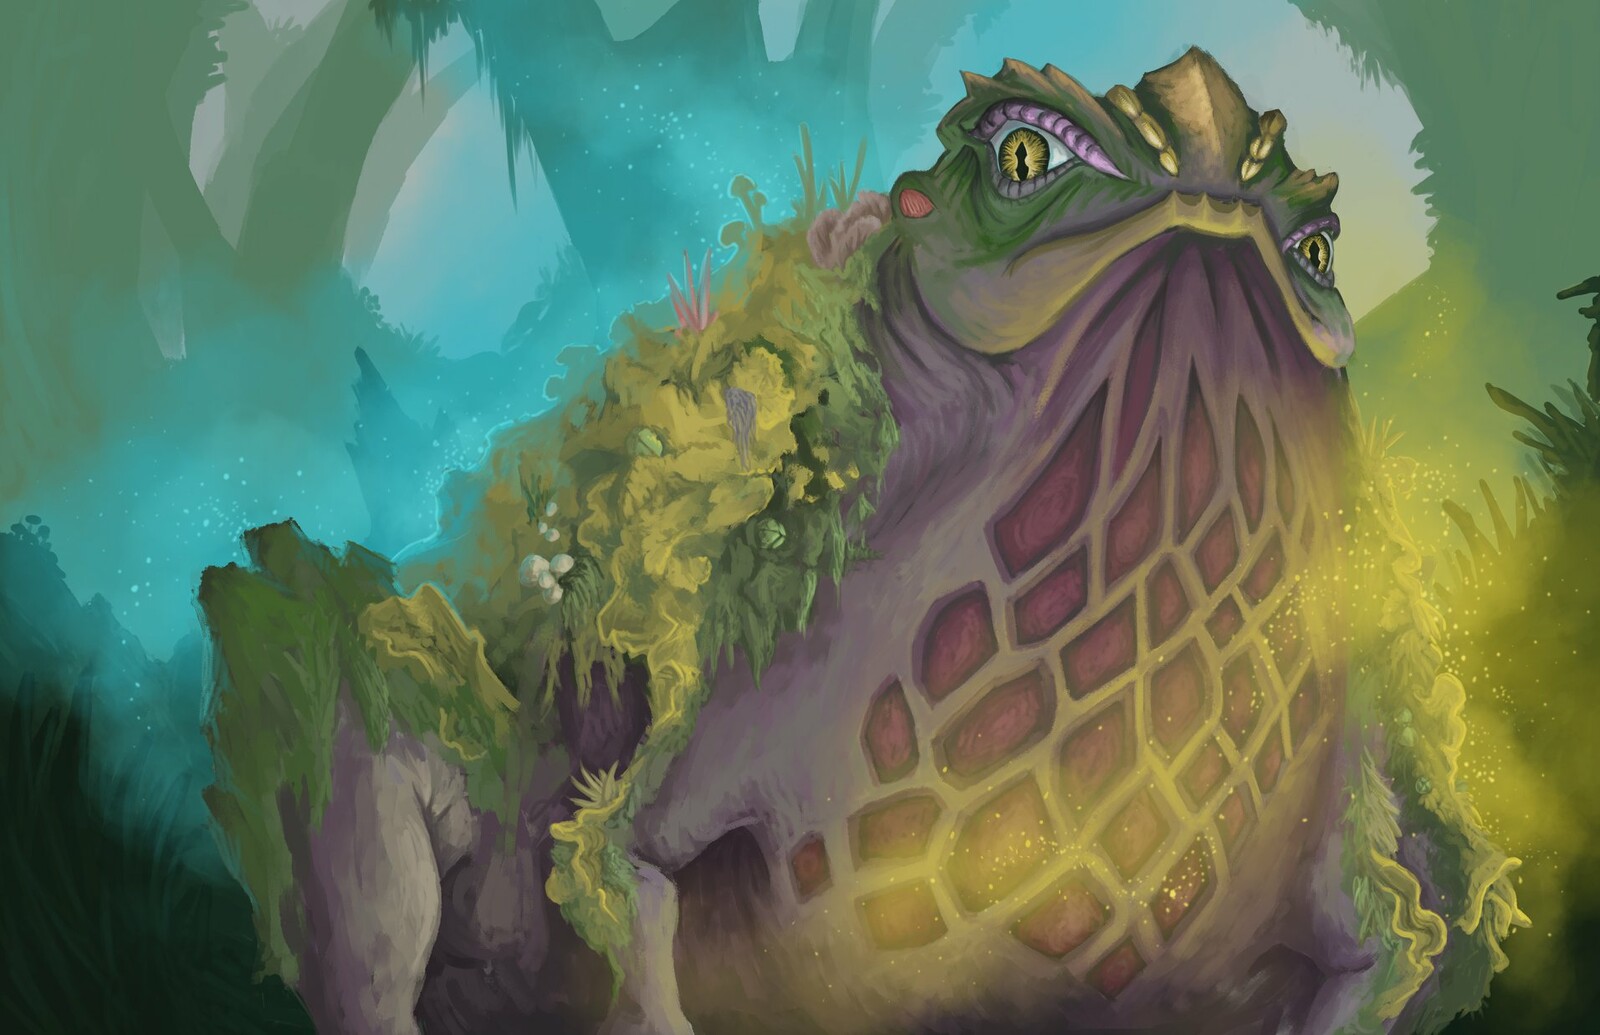 Glax - Creature Design "Toad creature made of fungus and rot"